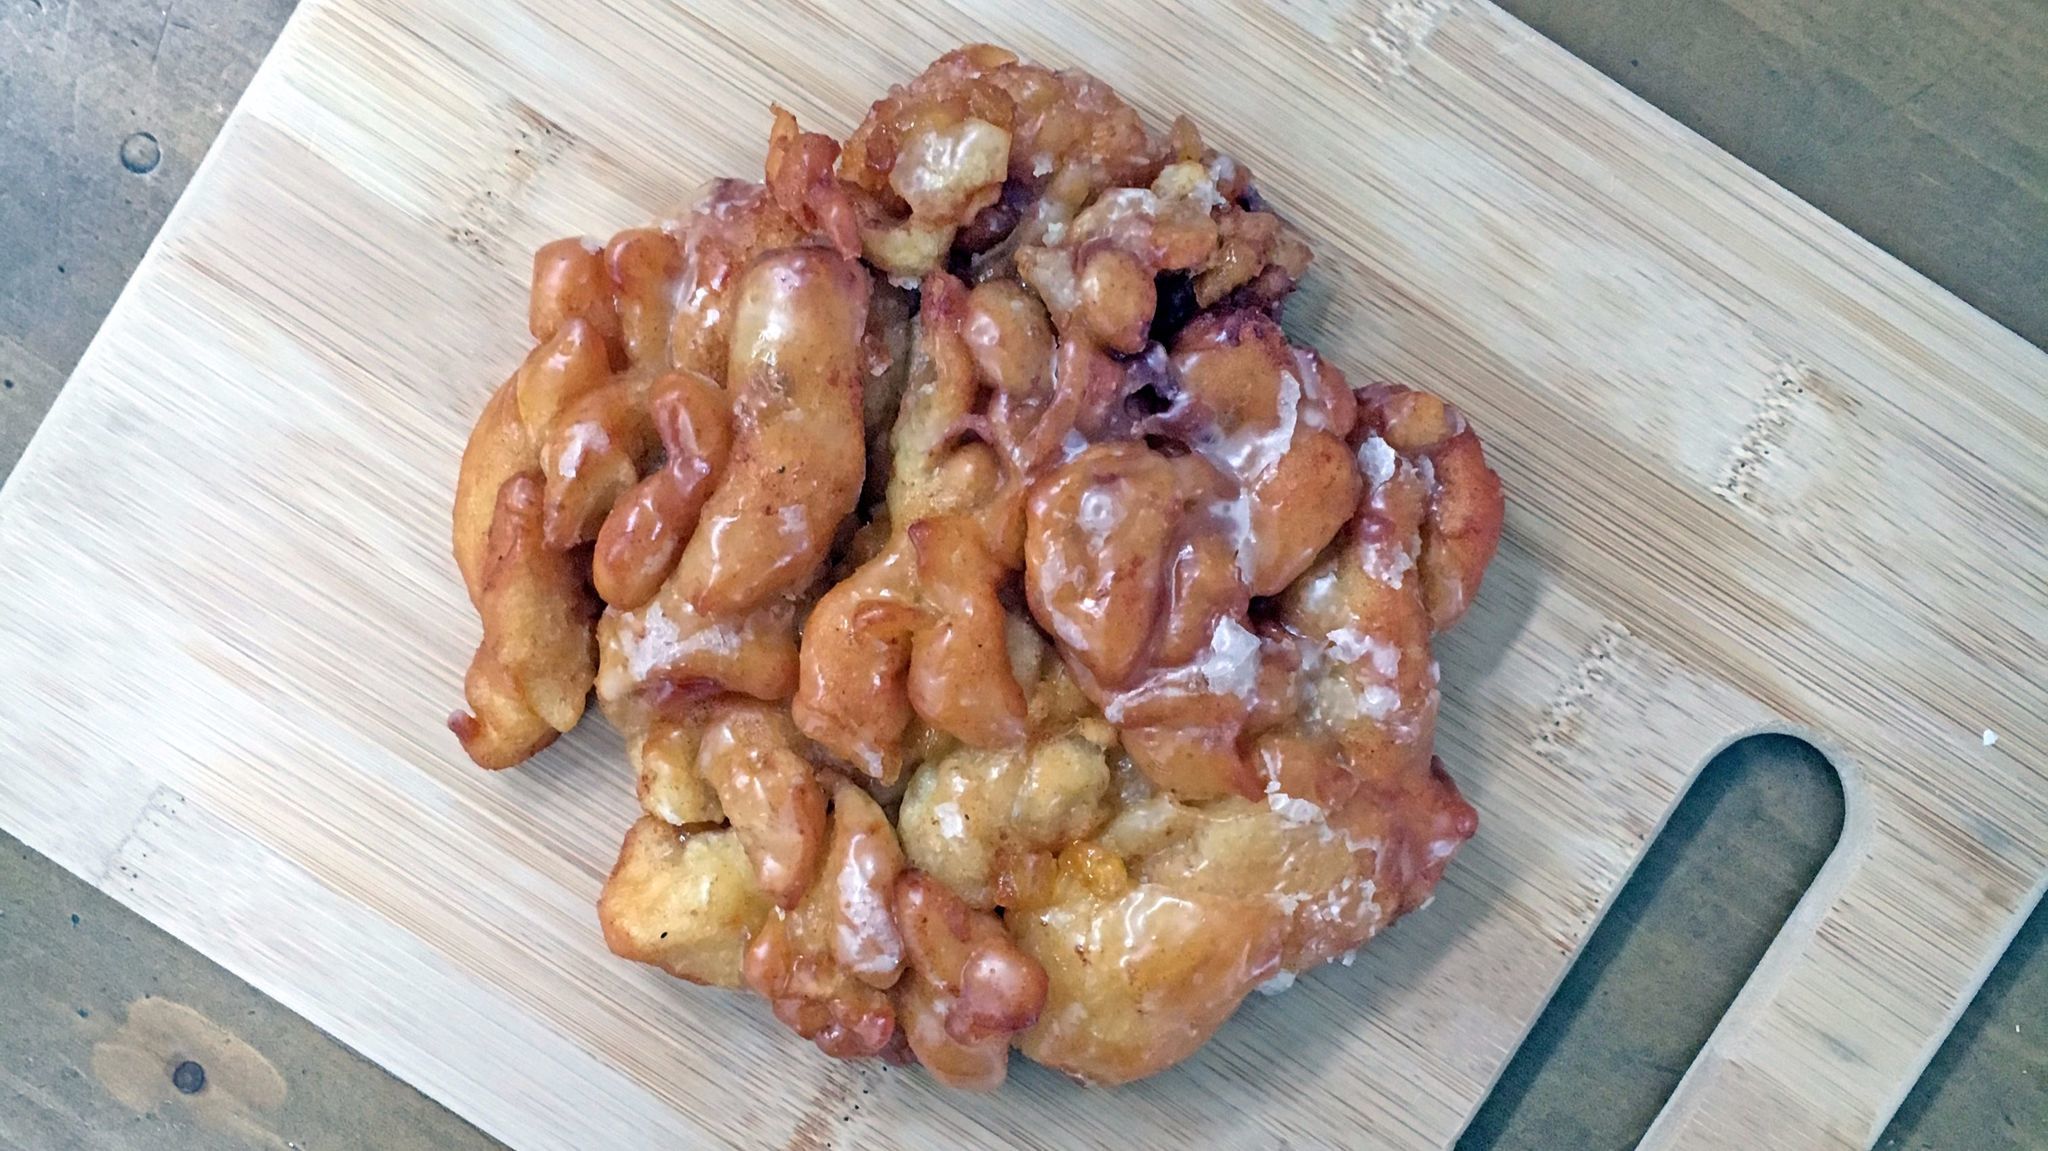 Apple fritter from Monarch Donuts.